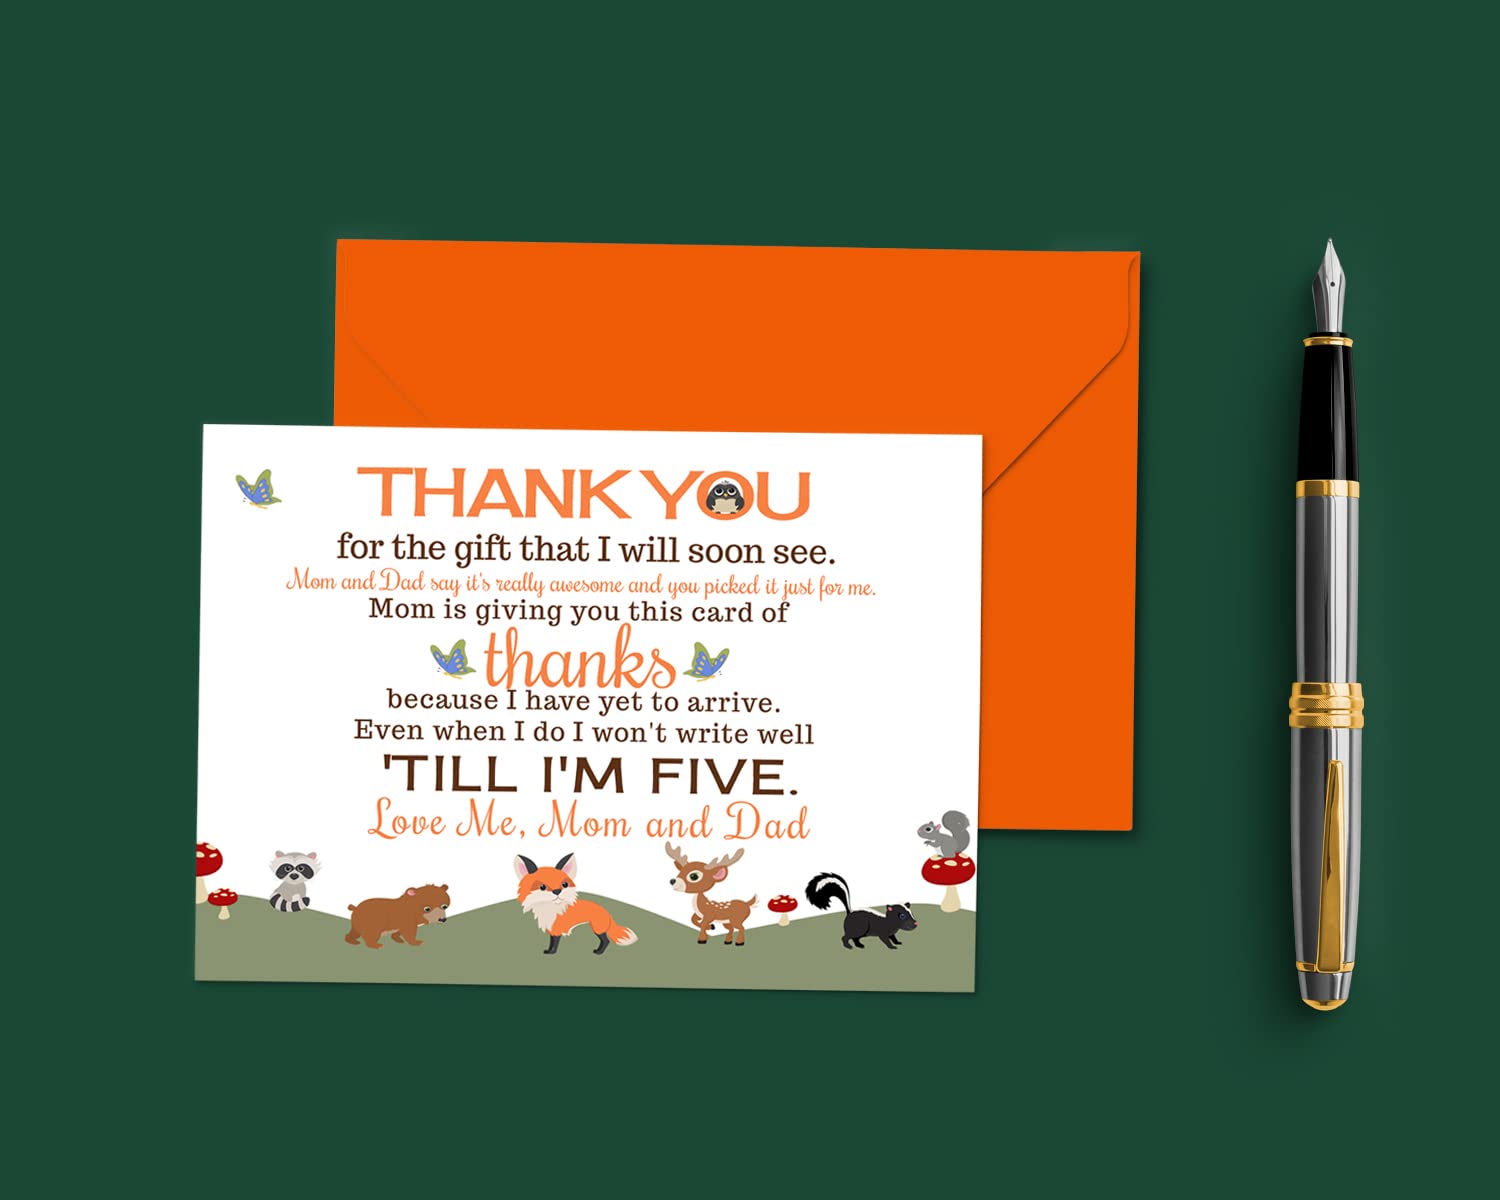 Woodland Baby Shower Thank You Cards with Envelopes (15 Pack) Prefilled Thanks from Boy or Girl – Individual Rustic Notecards for Babies Registry Gifts – Neutral Theme Orange